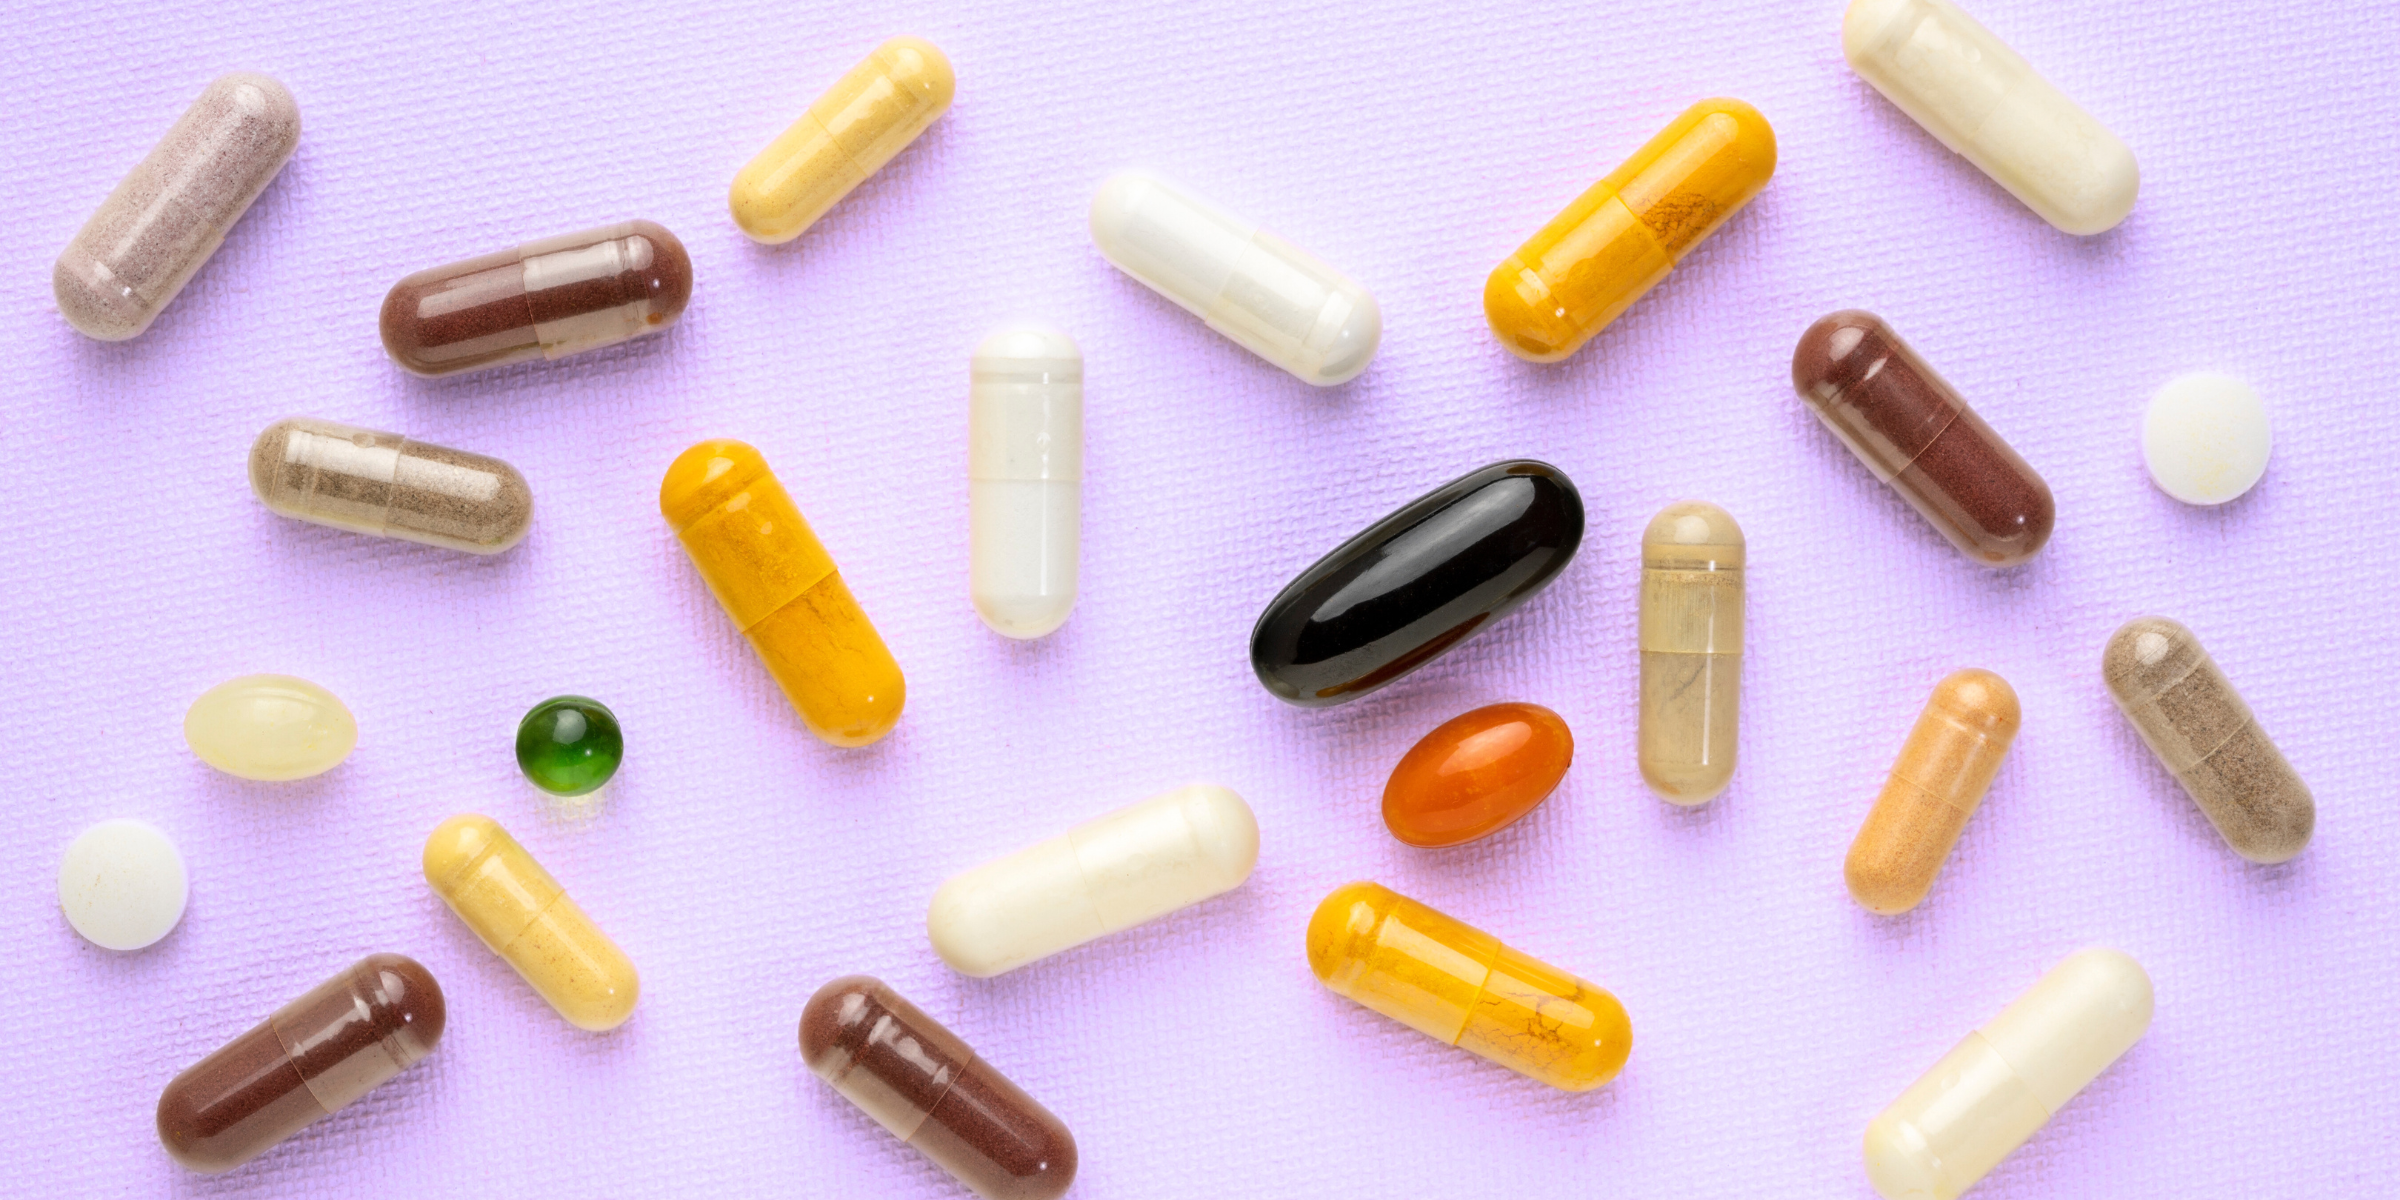 vitamins and supplements against a purple background